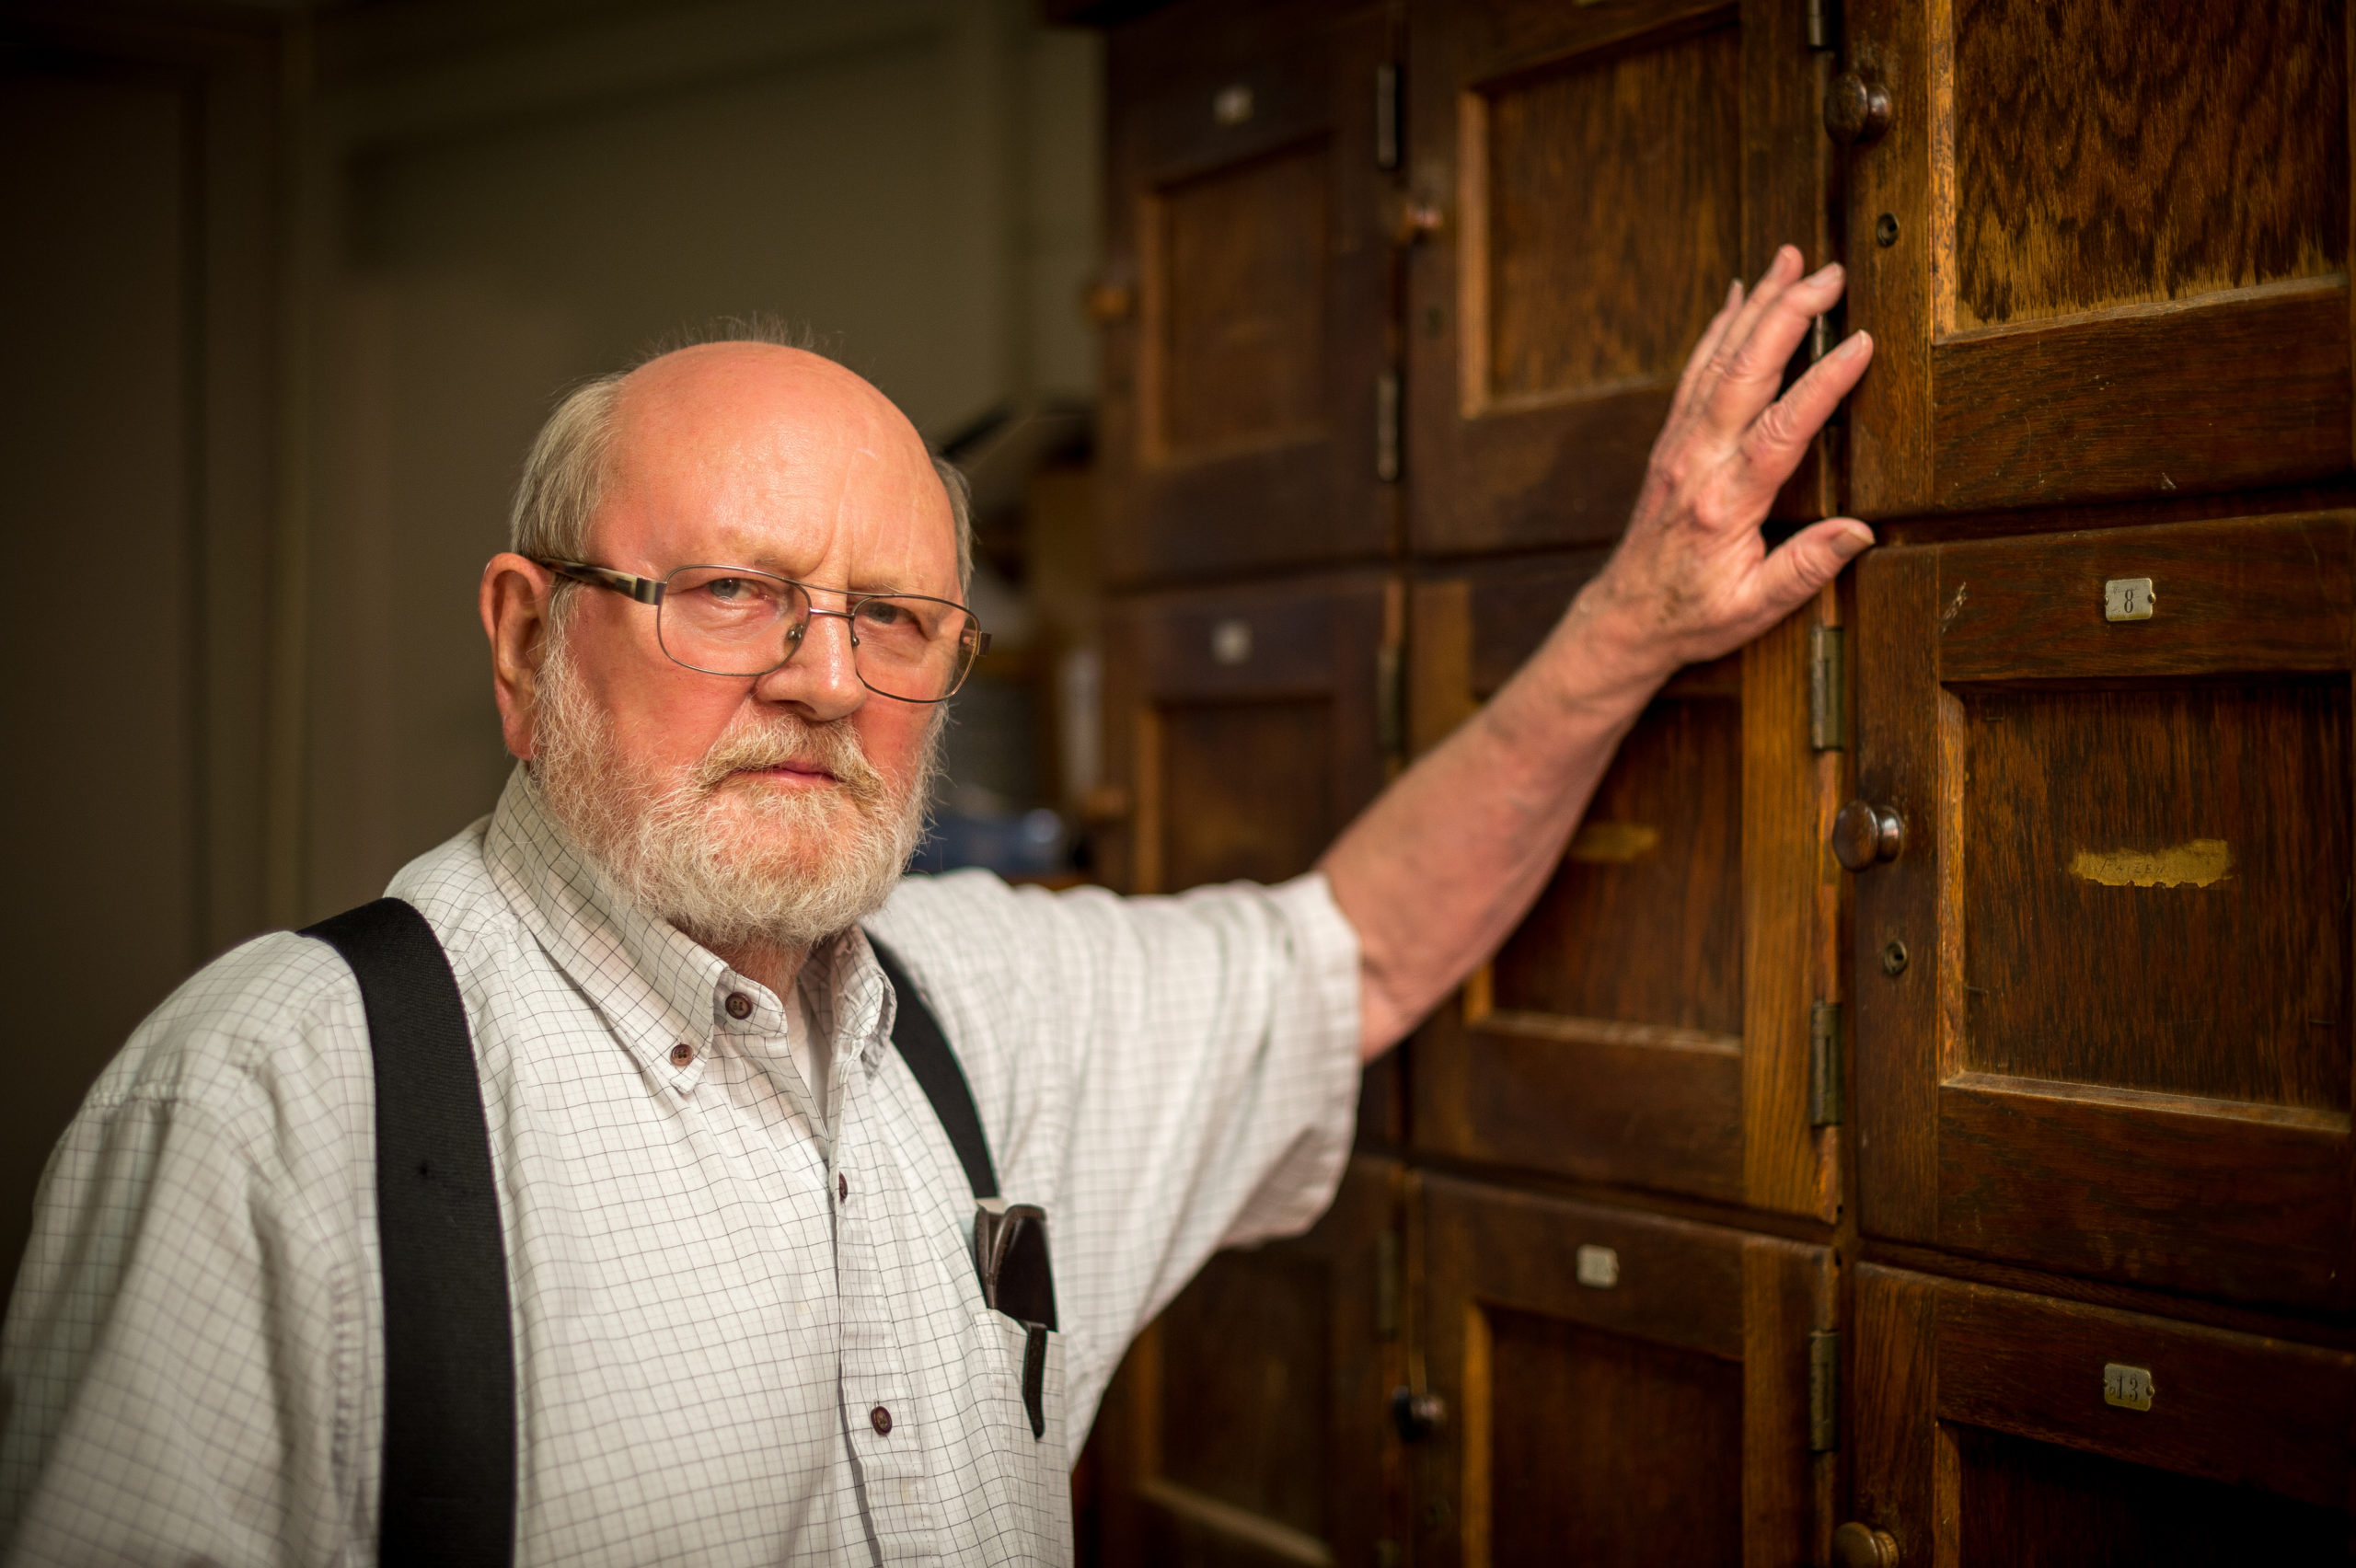 MGCCC archivest Charlie Sullivan in front of file cabinets in the archives collection